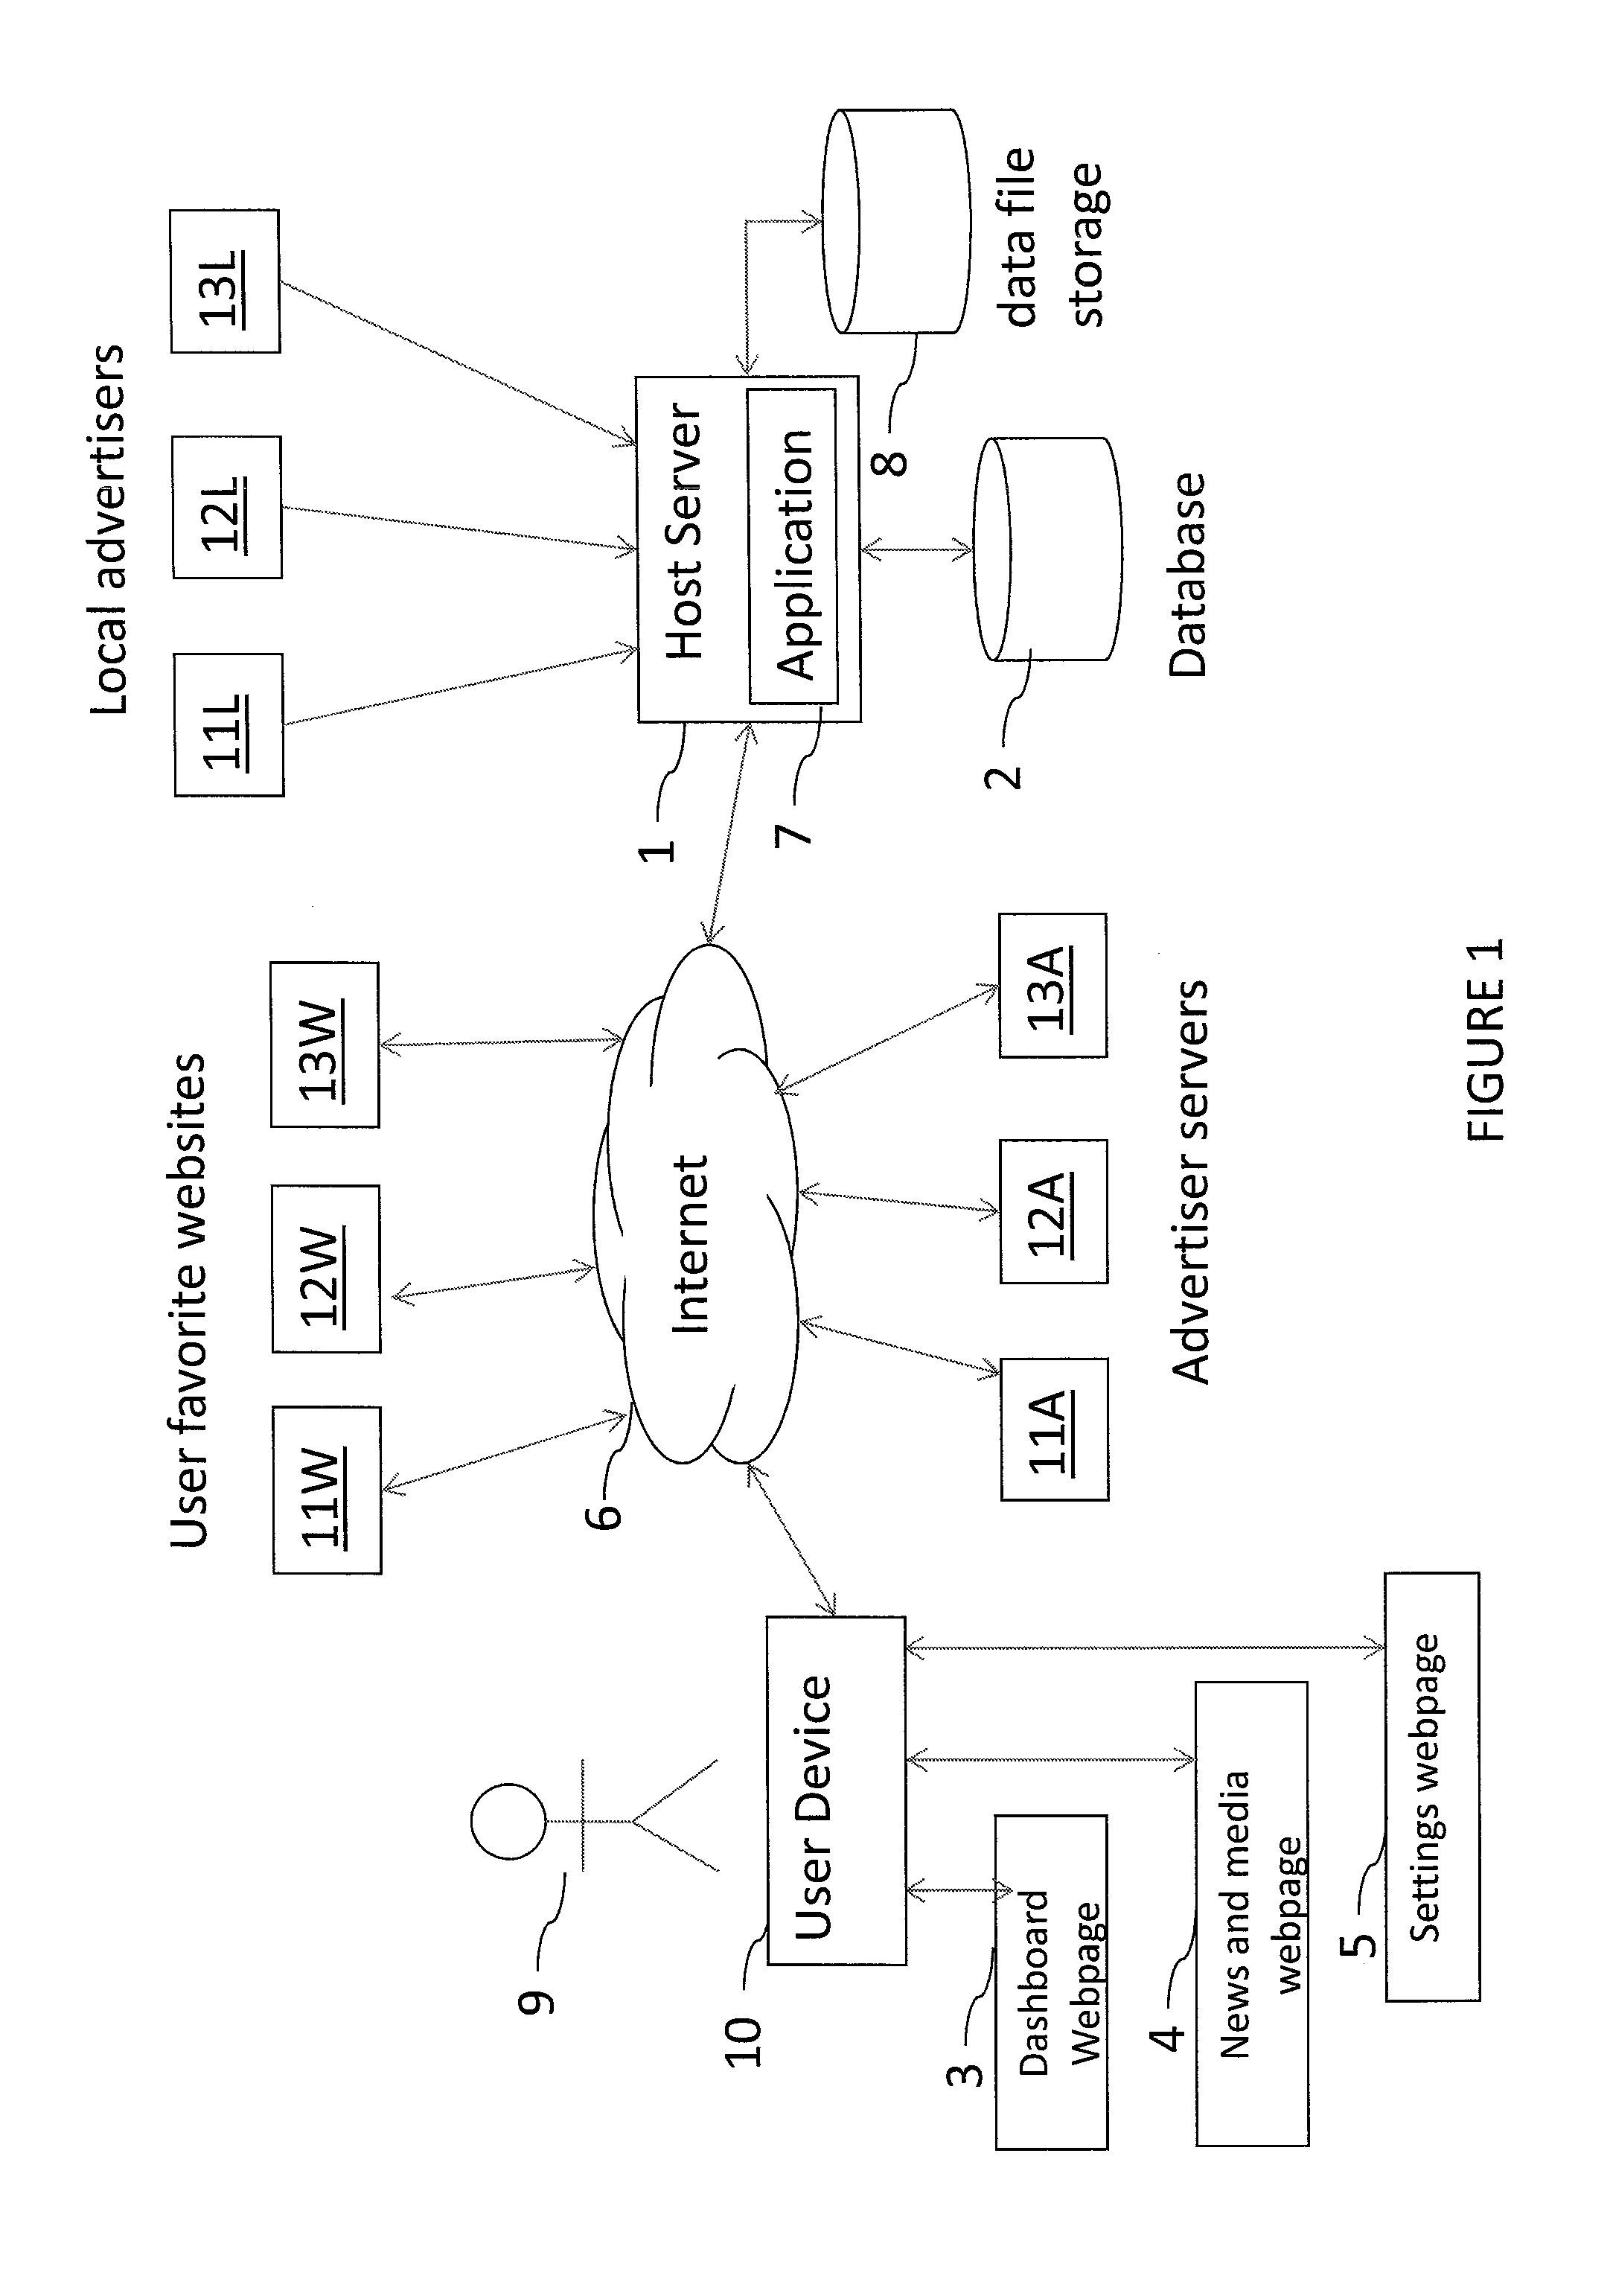 System and Method for Personalized Secure Website Portal